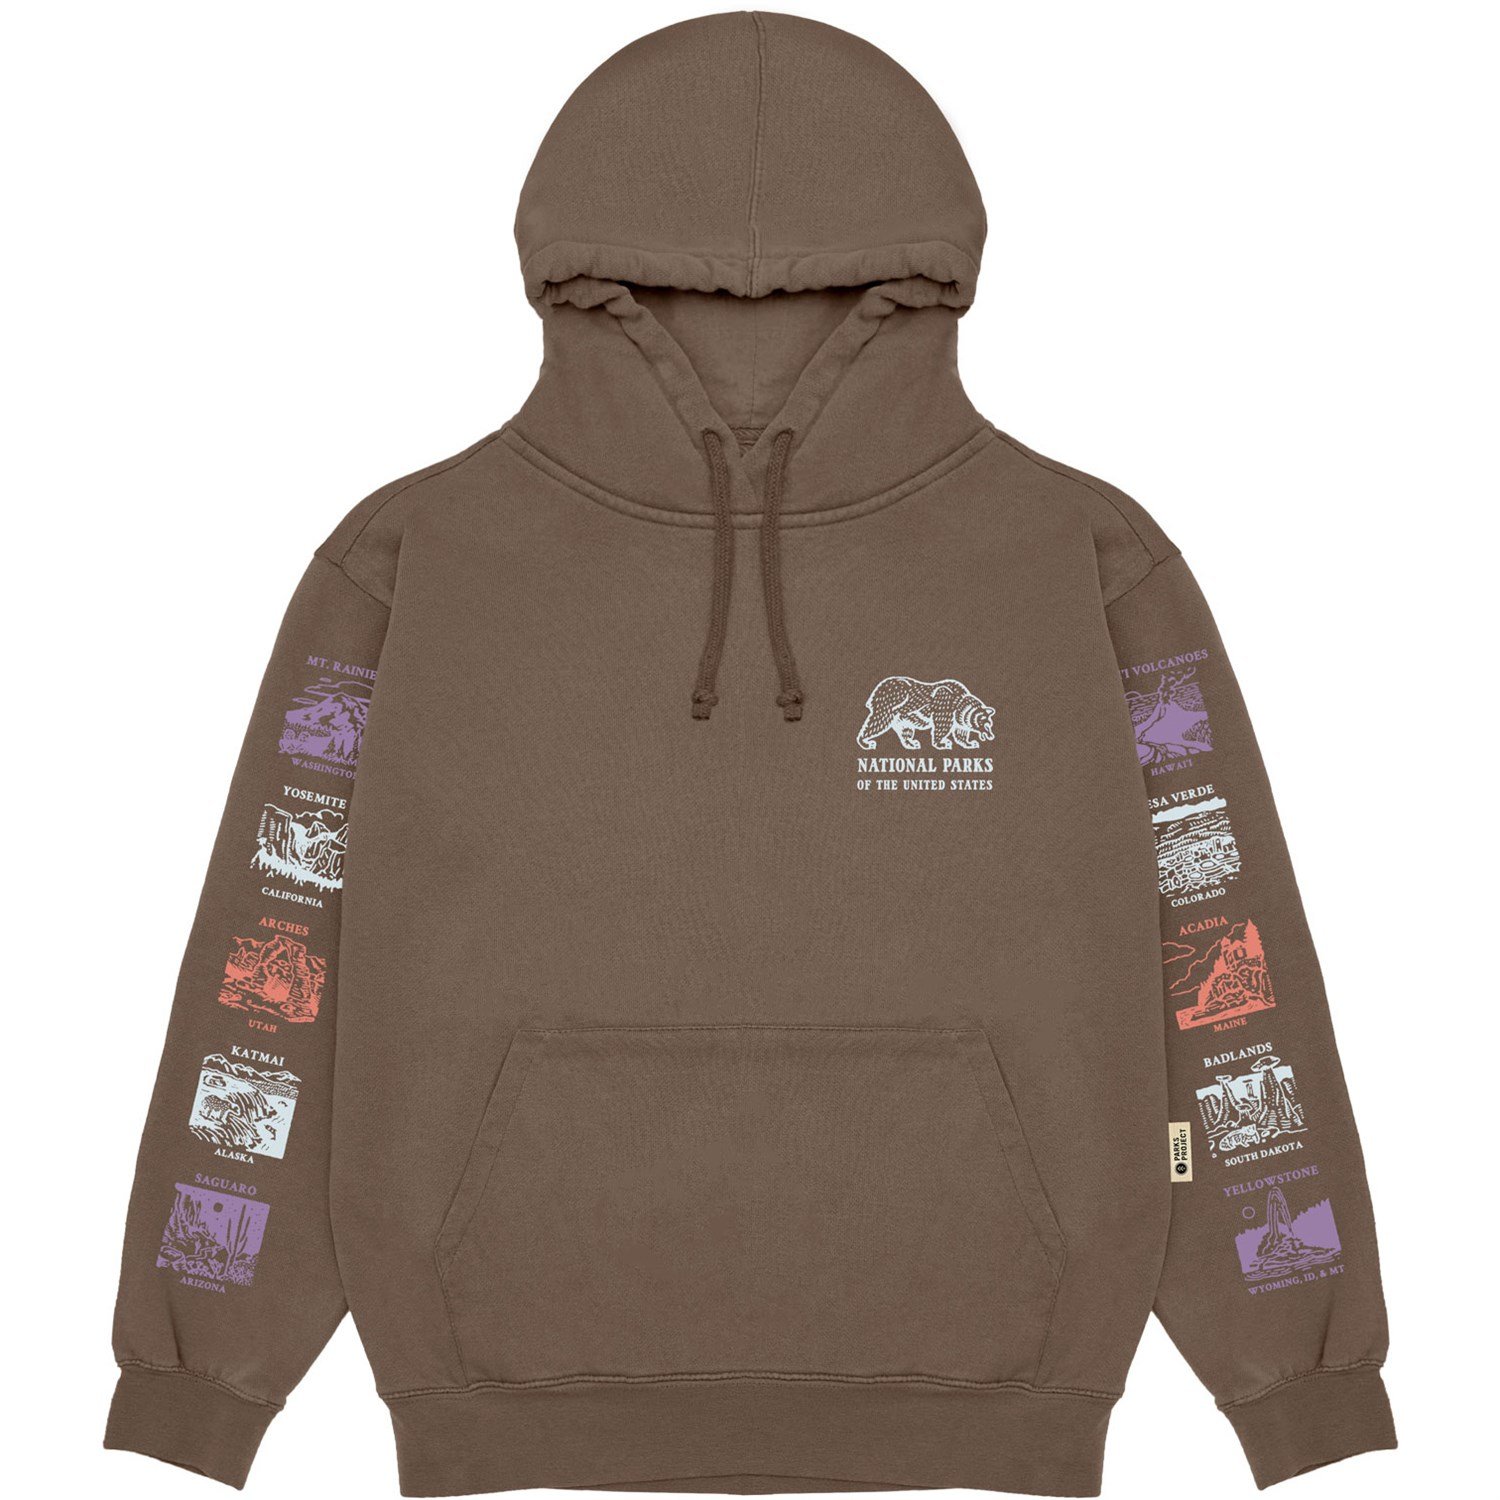 Худи Parks Project Parks Fill In Hoodie, коричневый